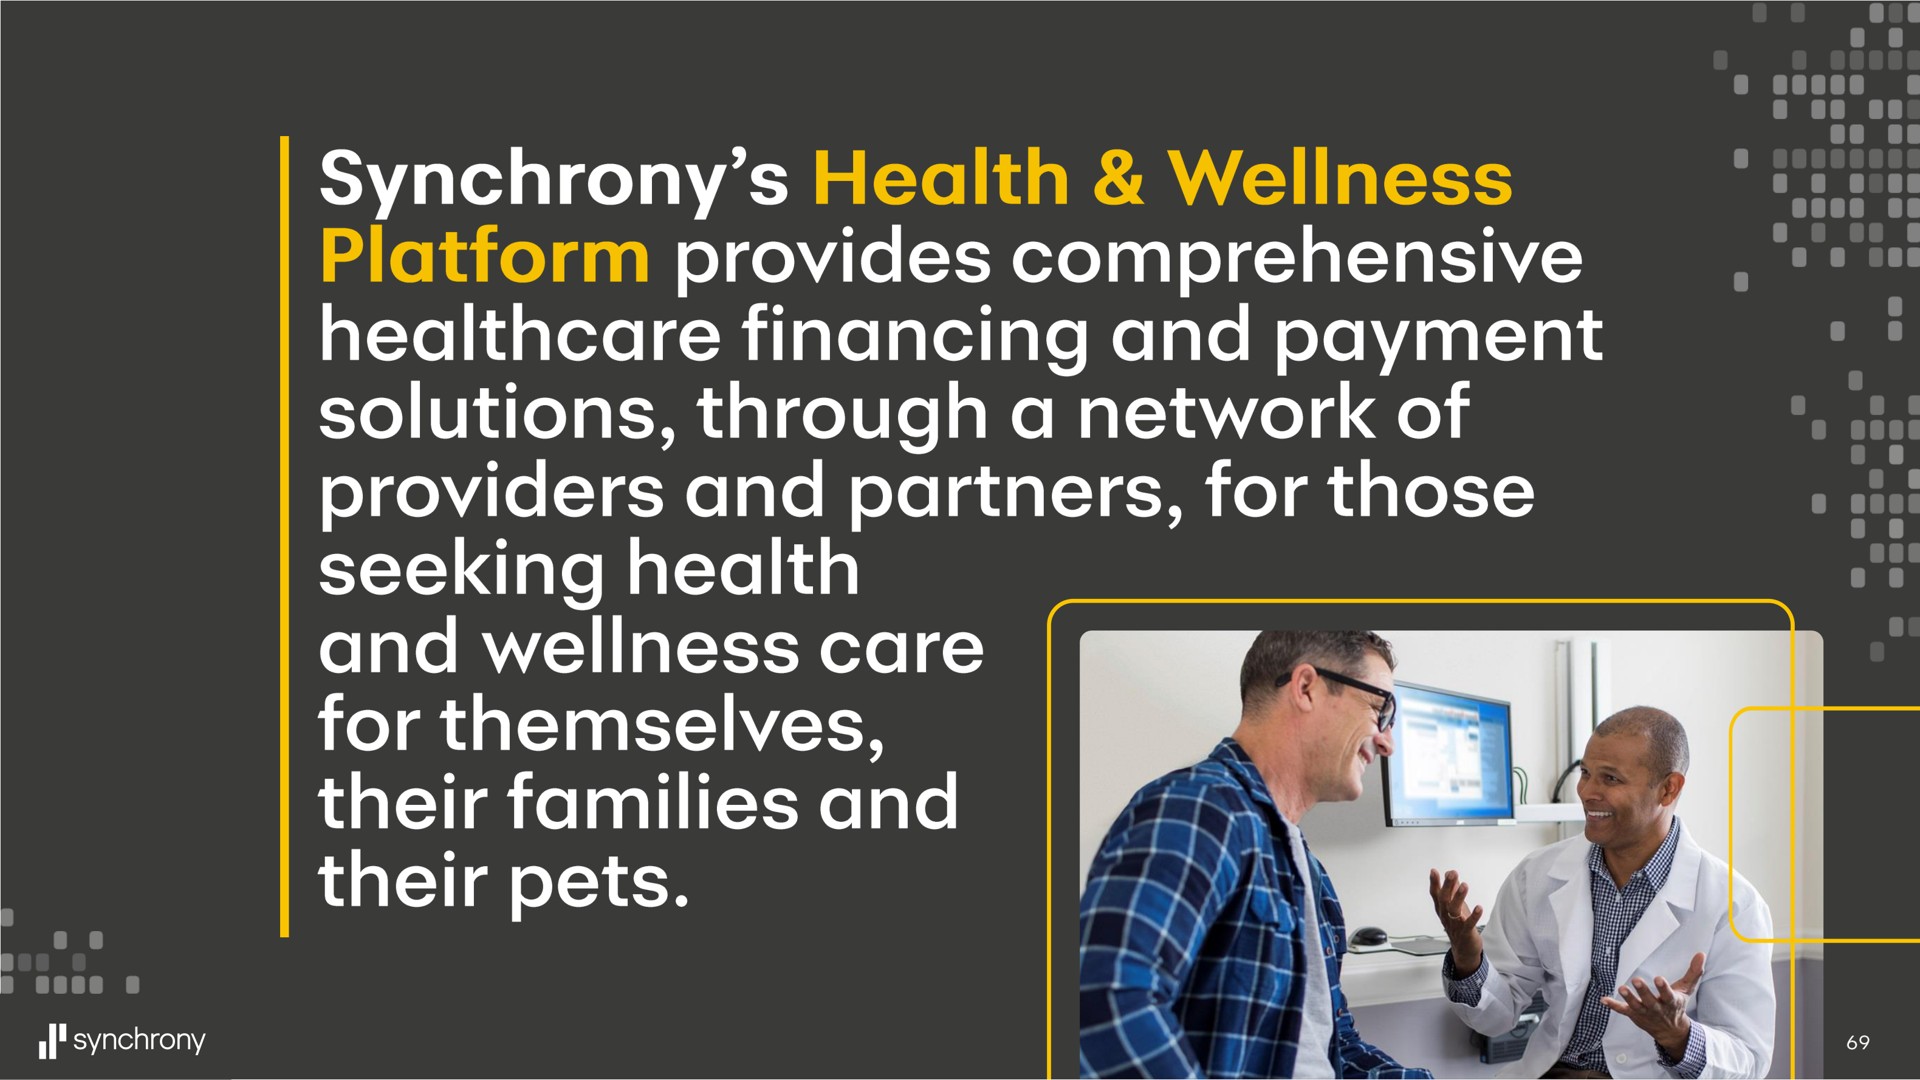 synchrony health wellness platform provides comprehensive financing and payment solutions through a network of providers and partners for those seeking health and wellness care for themselves their families and their pets | Synchrony Financial